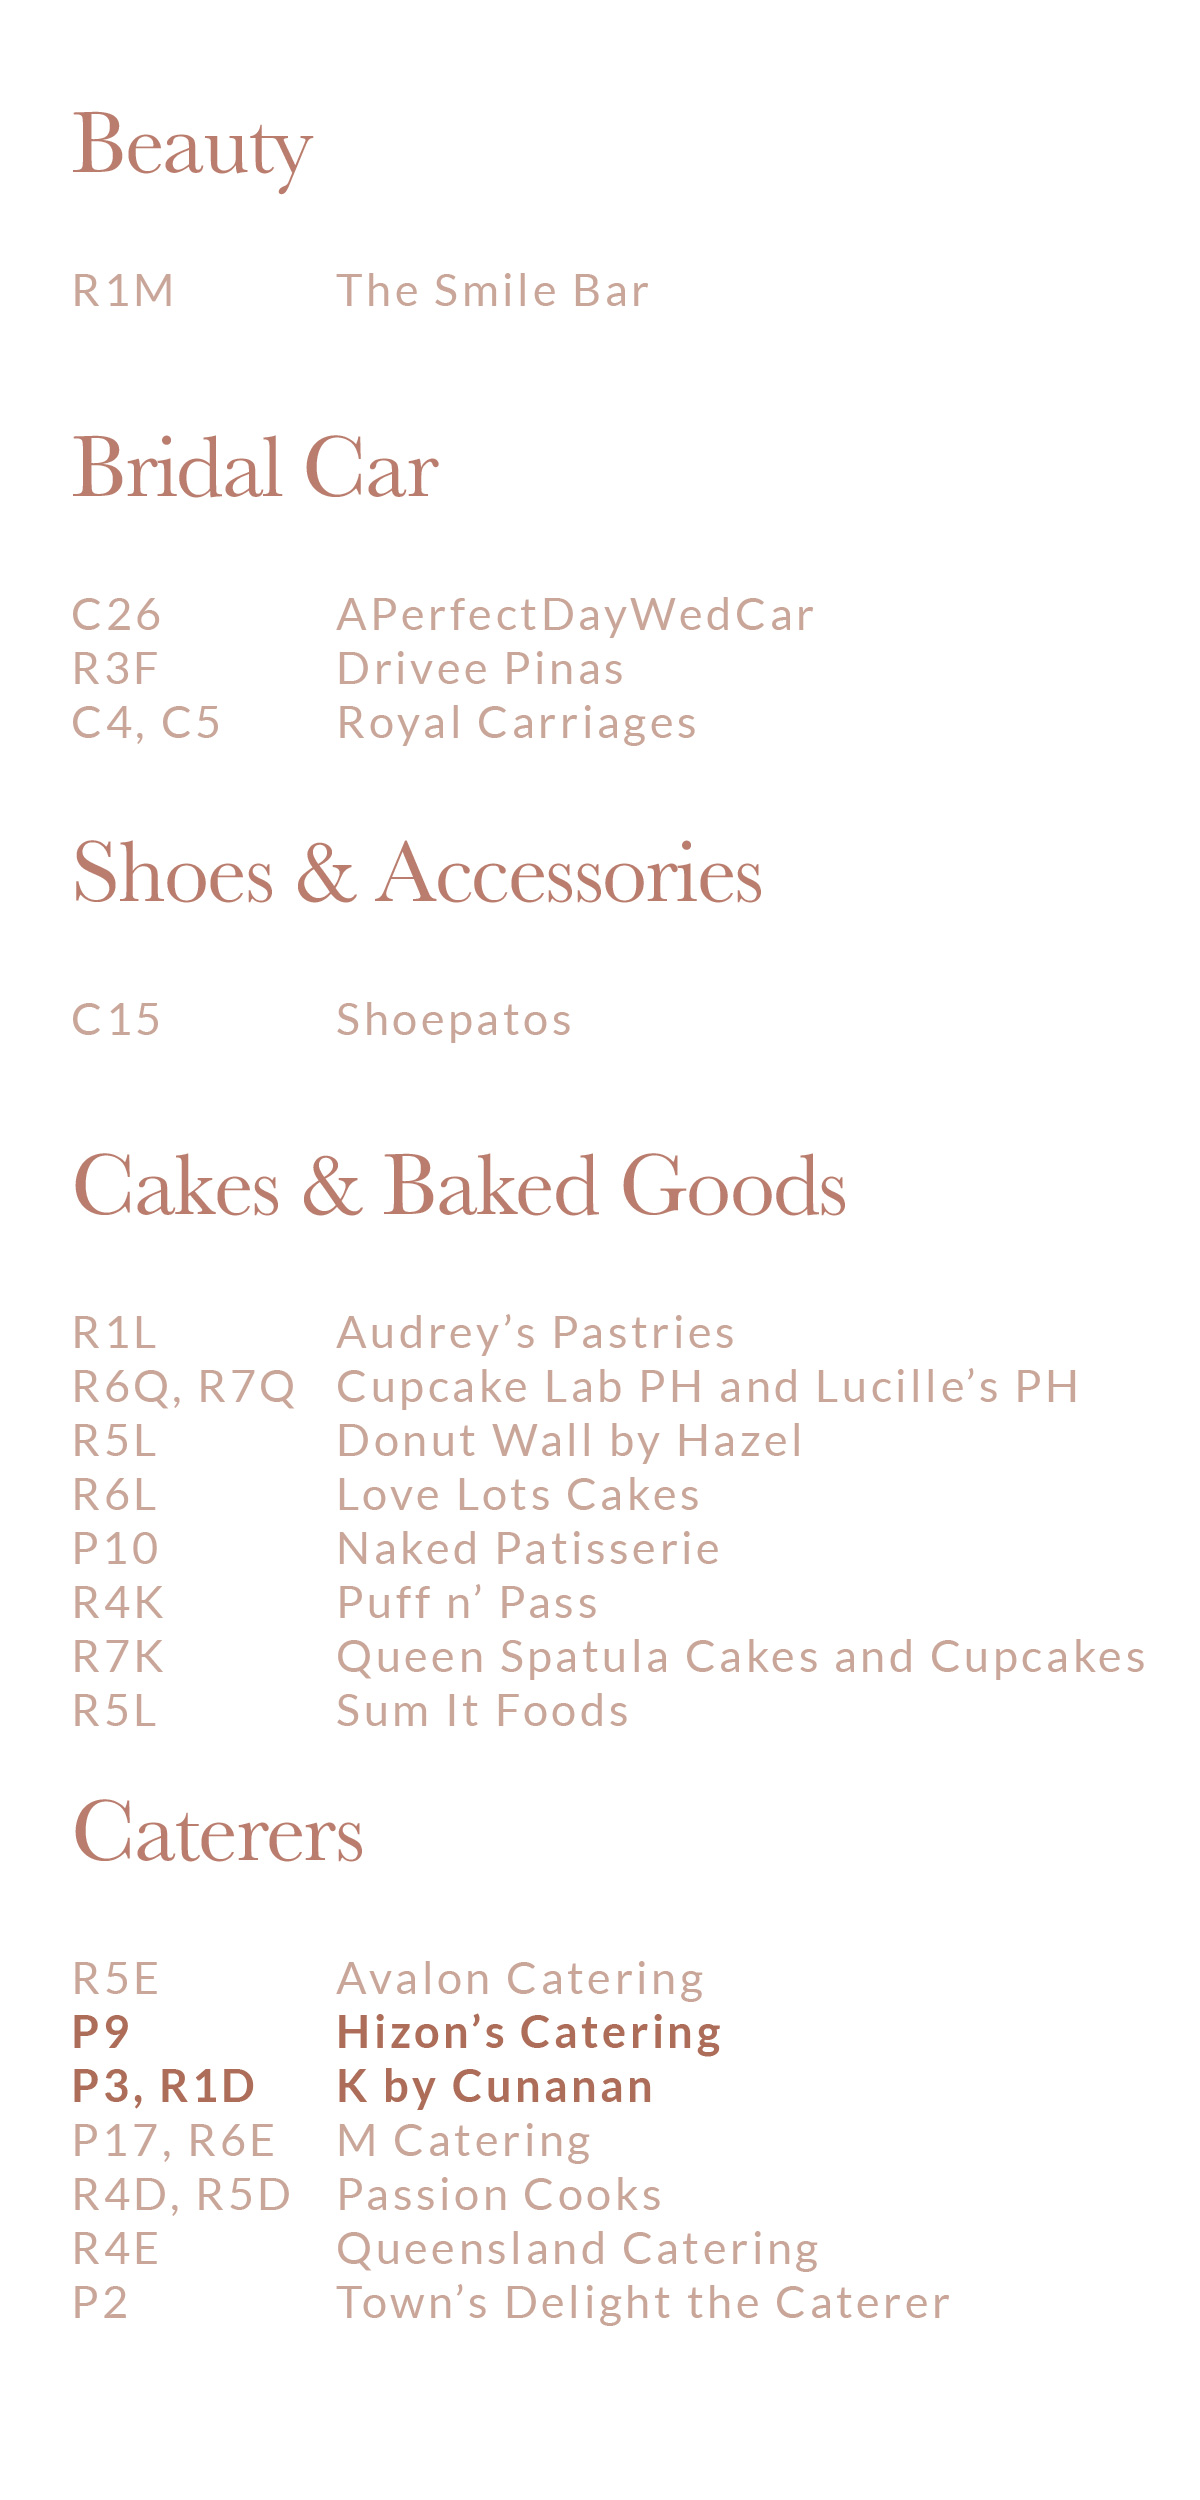  R1M, The Smile Bar PH; C26, APerfectDayWedCar; R3F, Drivee Pinas; C4, C5 Royal Carriages; C15, Shoepatos ;R1L, Audrey’s Pastries ;R6Q,R7Q, Cupcake Lab PH and Lucille's PH ;R5L, Donut Wall by Hazel ;R6L, Love Lots Cakes ;P10, Naked Patisserie ;R4K, Puff n' Pass ;R7K, Queen Spatula Cakes and Cupcakes ;R5L, Sum It Foods ;R5E, Avalon Catering ;P9, Hizon’s Catering ;P3, R1D, K by Cunanan ;P17, R6E, M Catering ;R4D, R5D, Passion Cooks ;R4E, Queensland Catering ;P2, Town’s Delight the Caterer